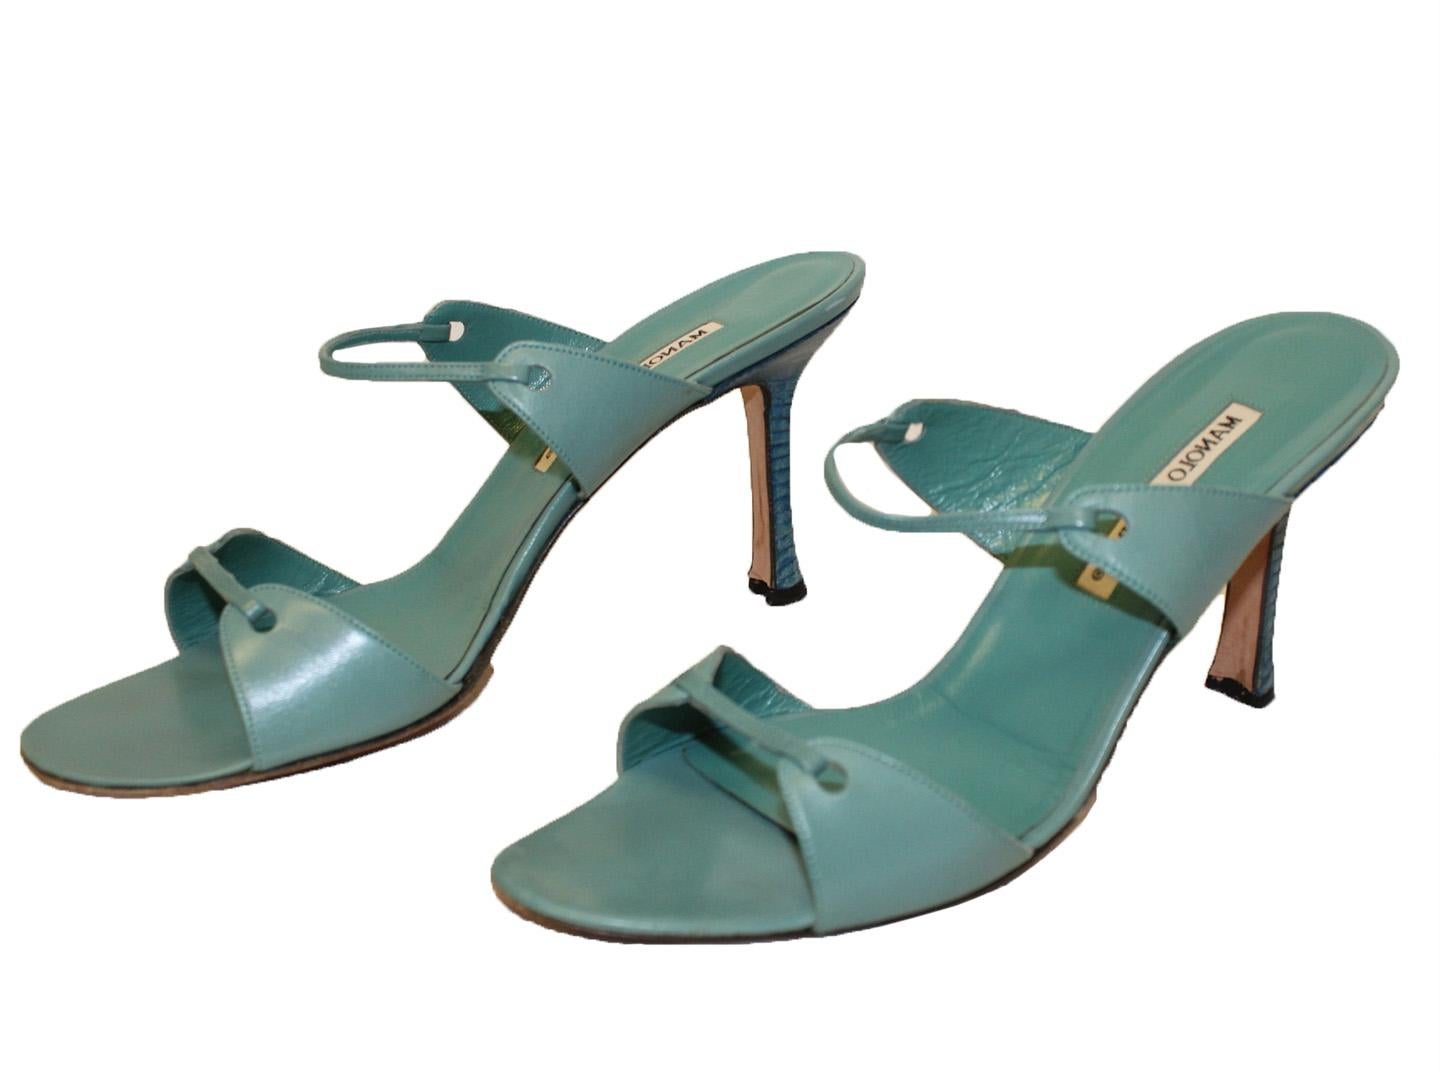 Manolo Blahnik Turquoise Leather Slip On Shoes In Excellent Condition For Sale In Palm Beach, FL